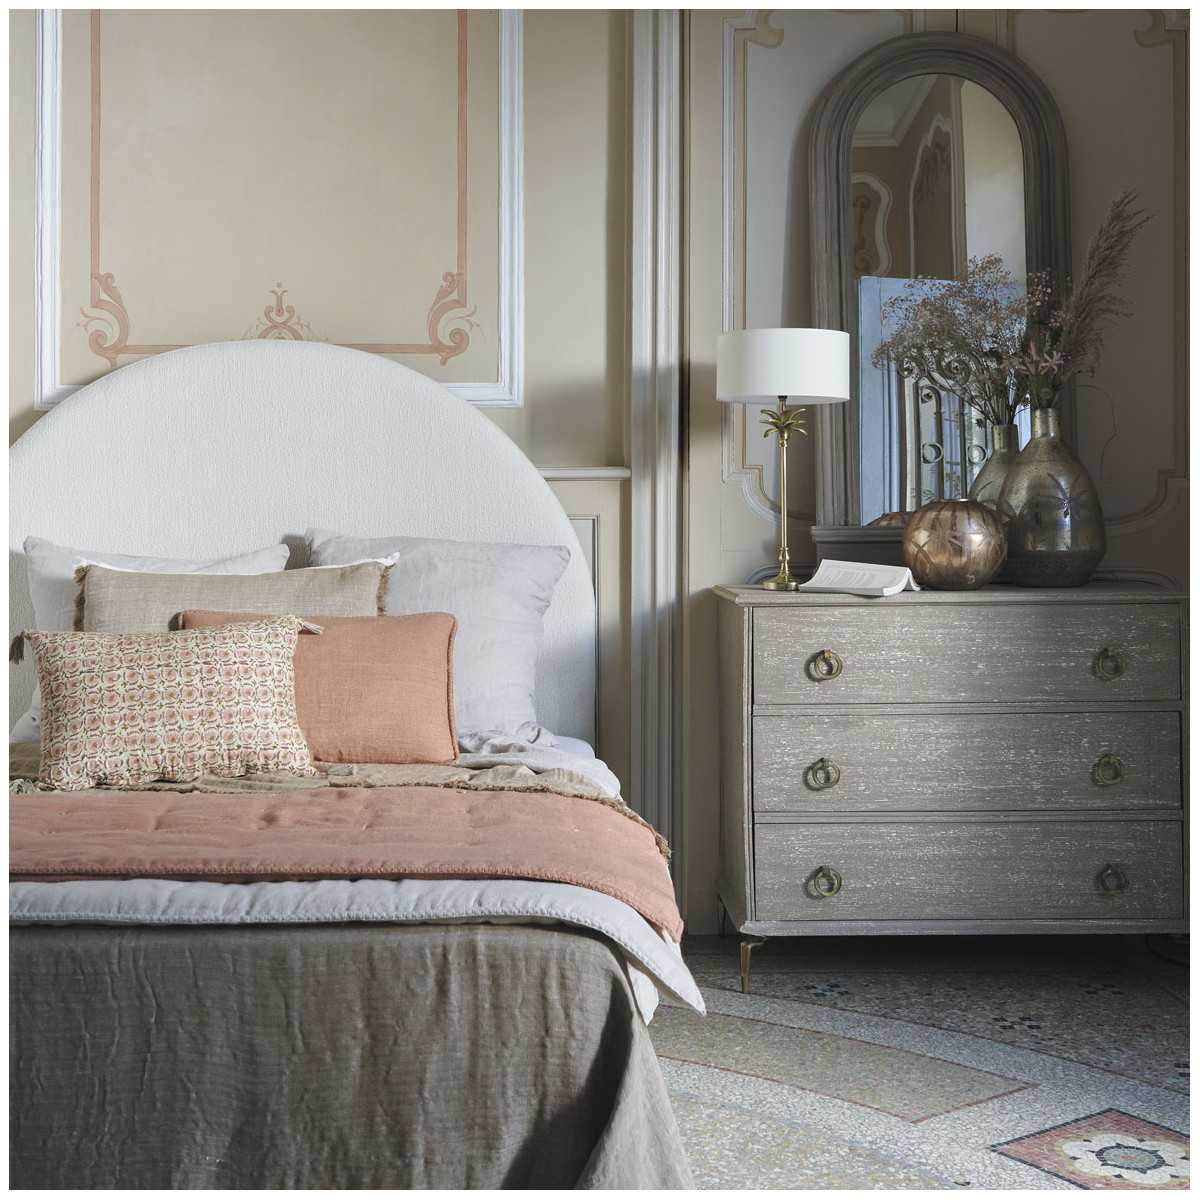 Category BEDROOM - Bougie personnalisée : Carlotta chest of drawers , KELSI microfiber bed , KELSI natural leather bed , MARG...